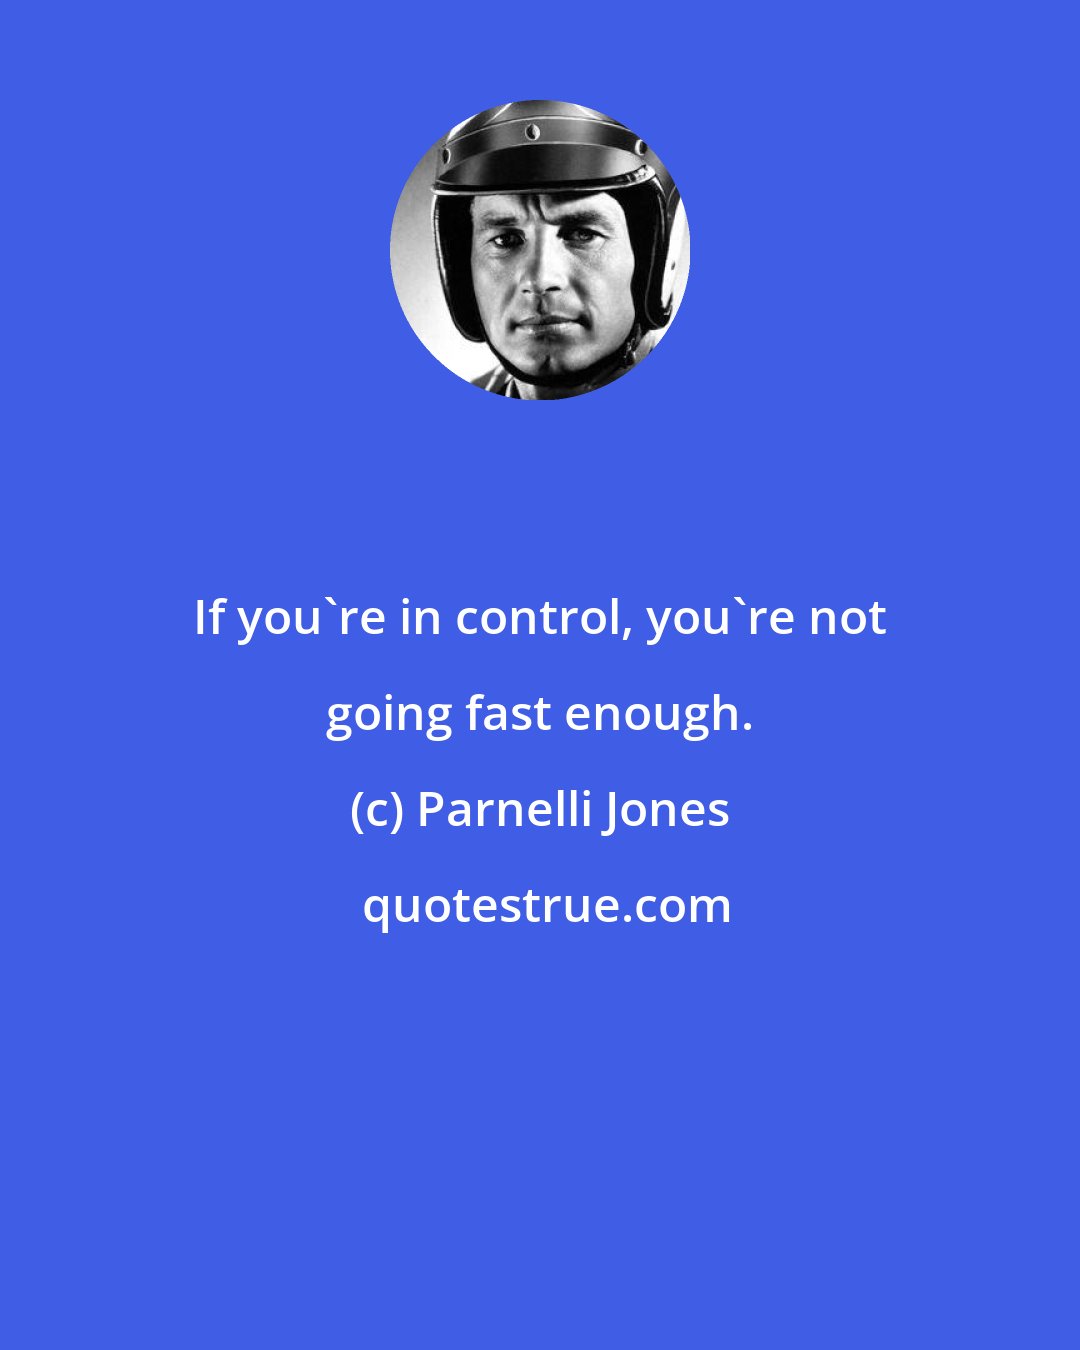 Parnelli Jones: If you're in control, you're not going fast enough.